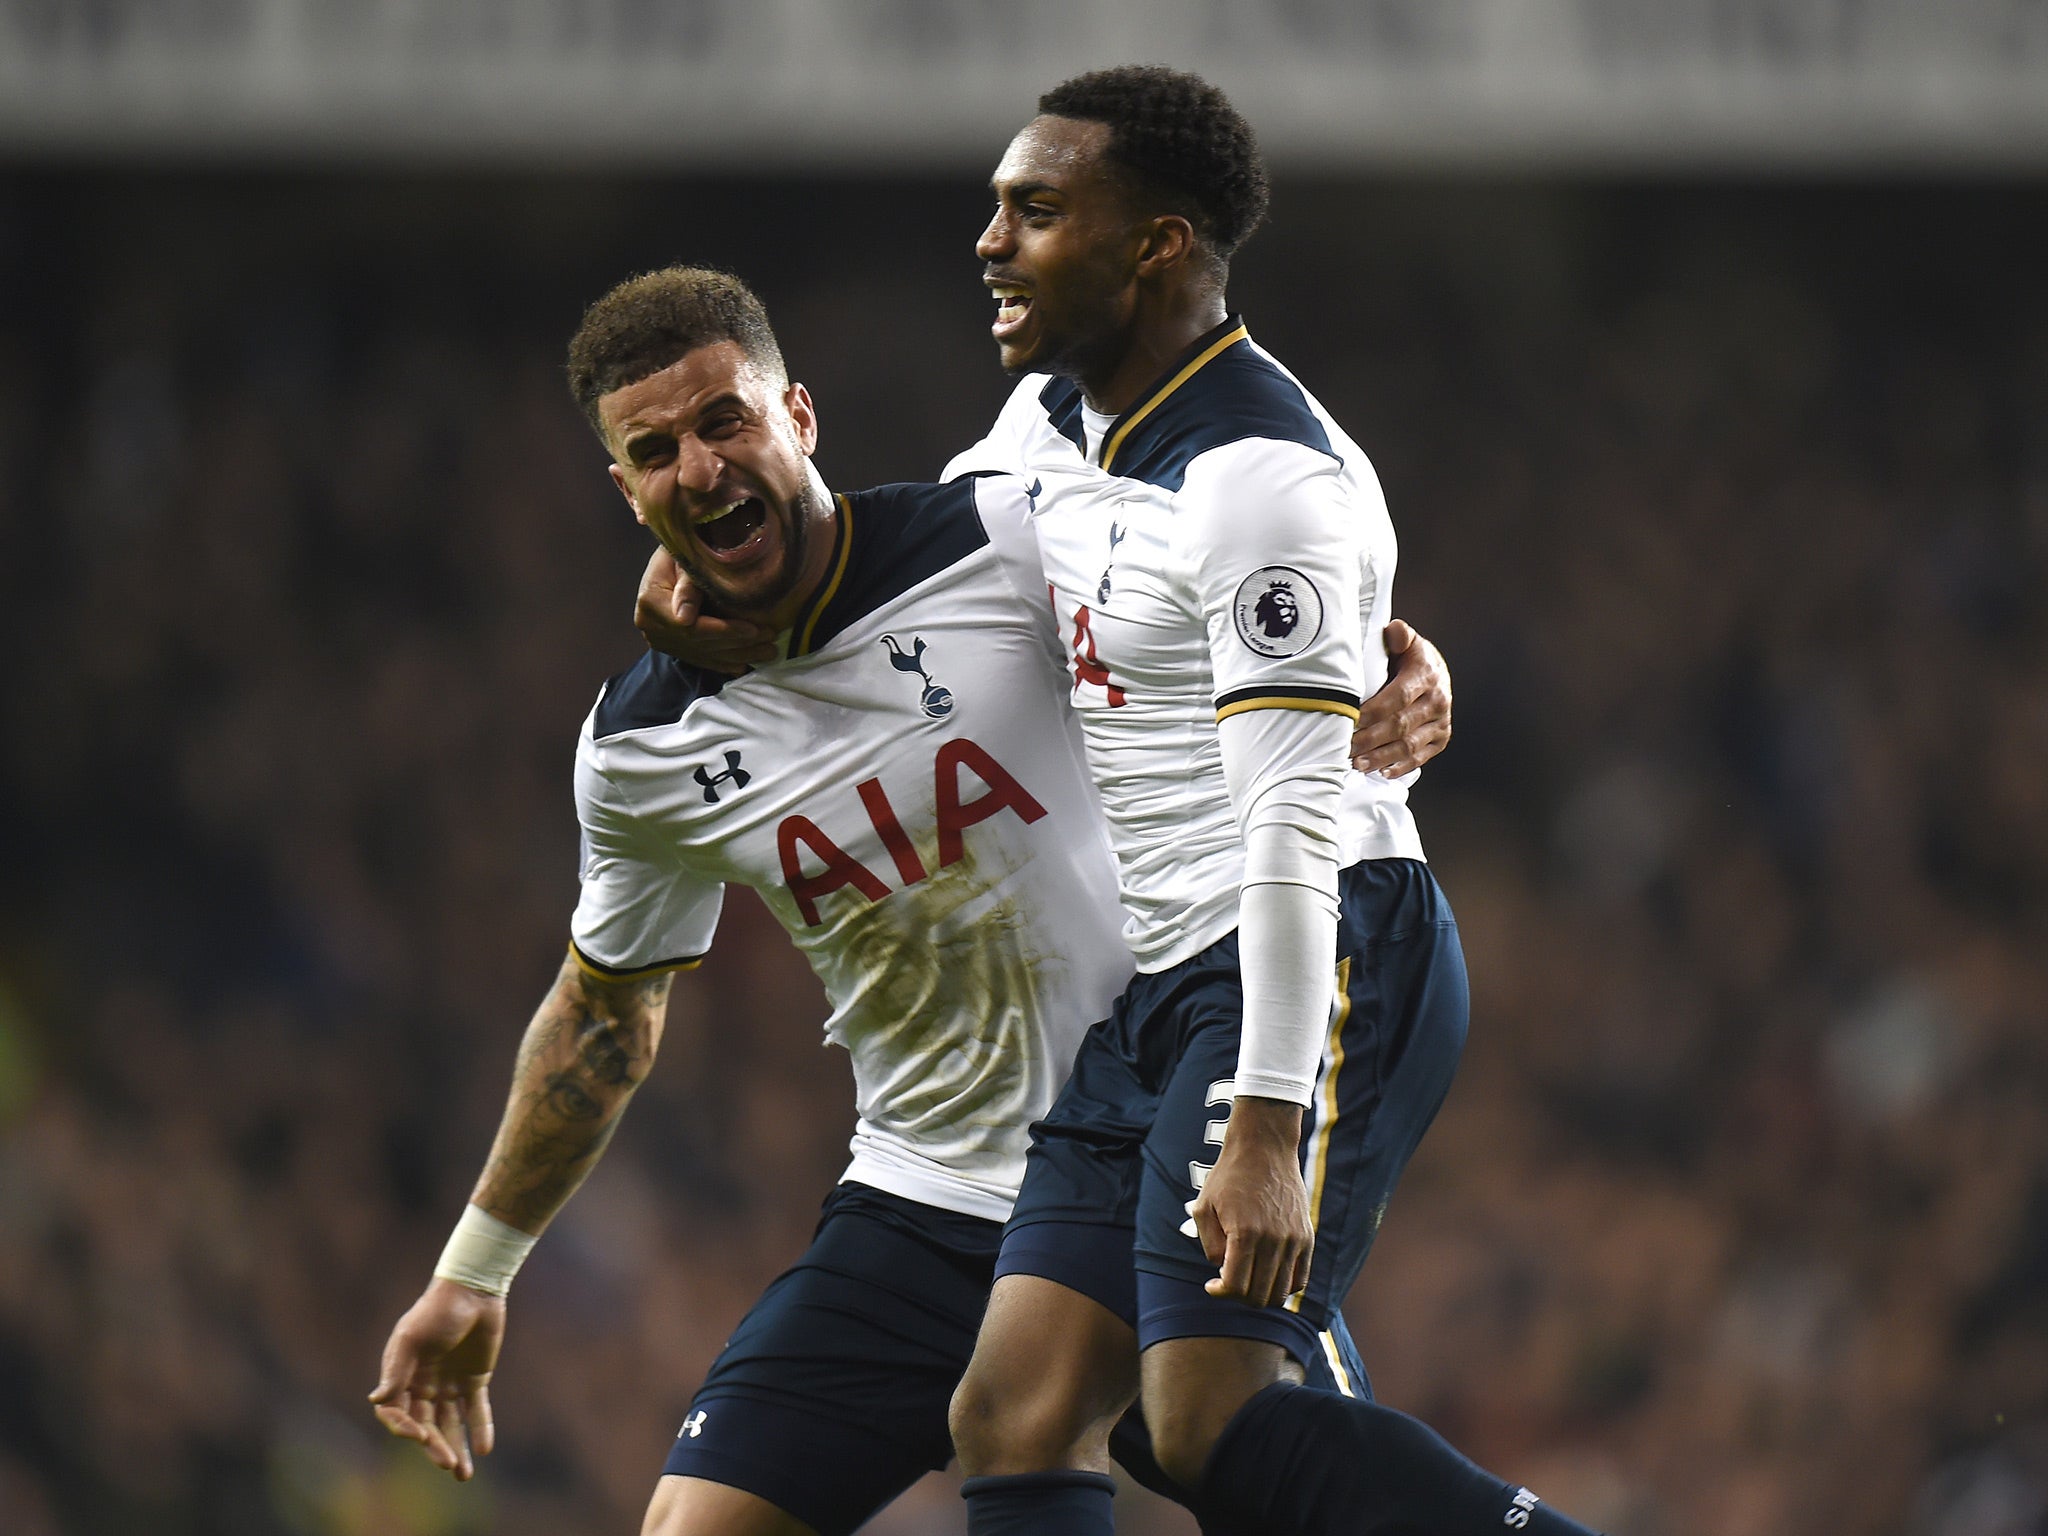 Full-backs Danny Rose and Kyle Walker are key to the way Tottenham play